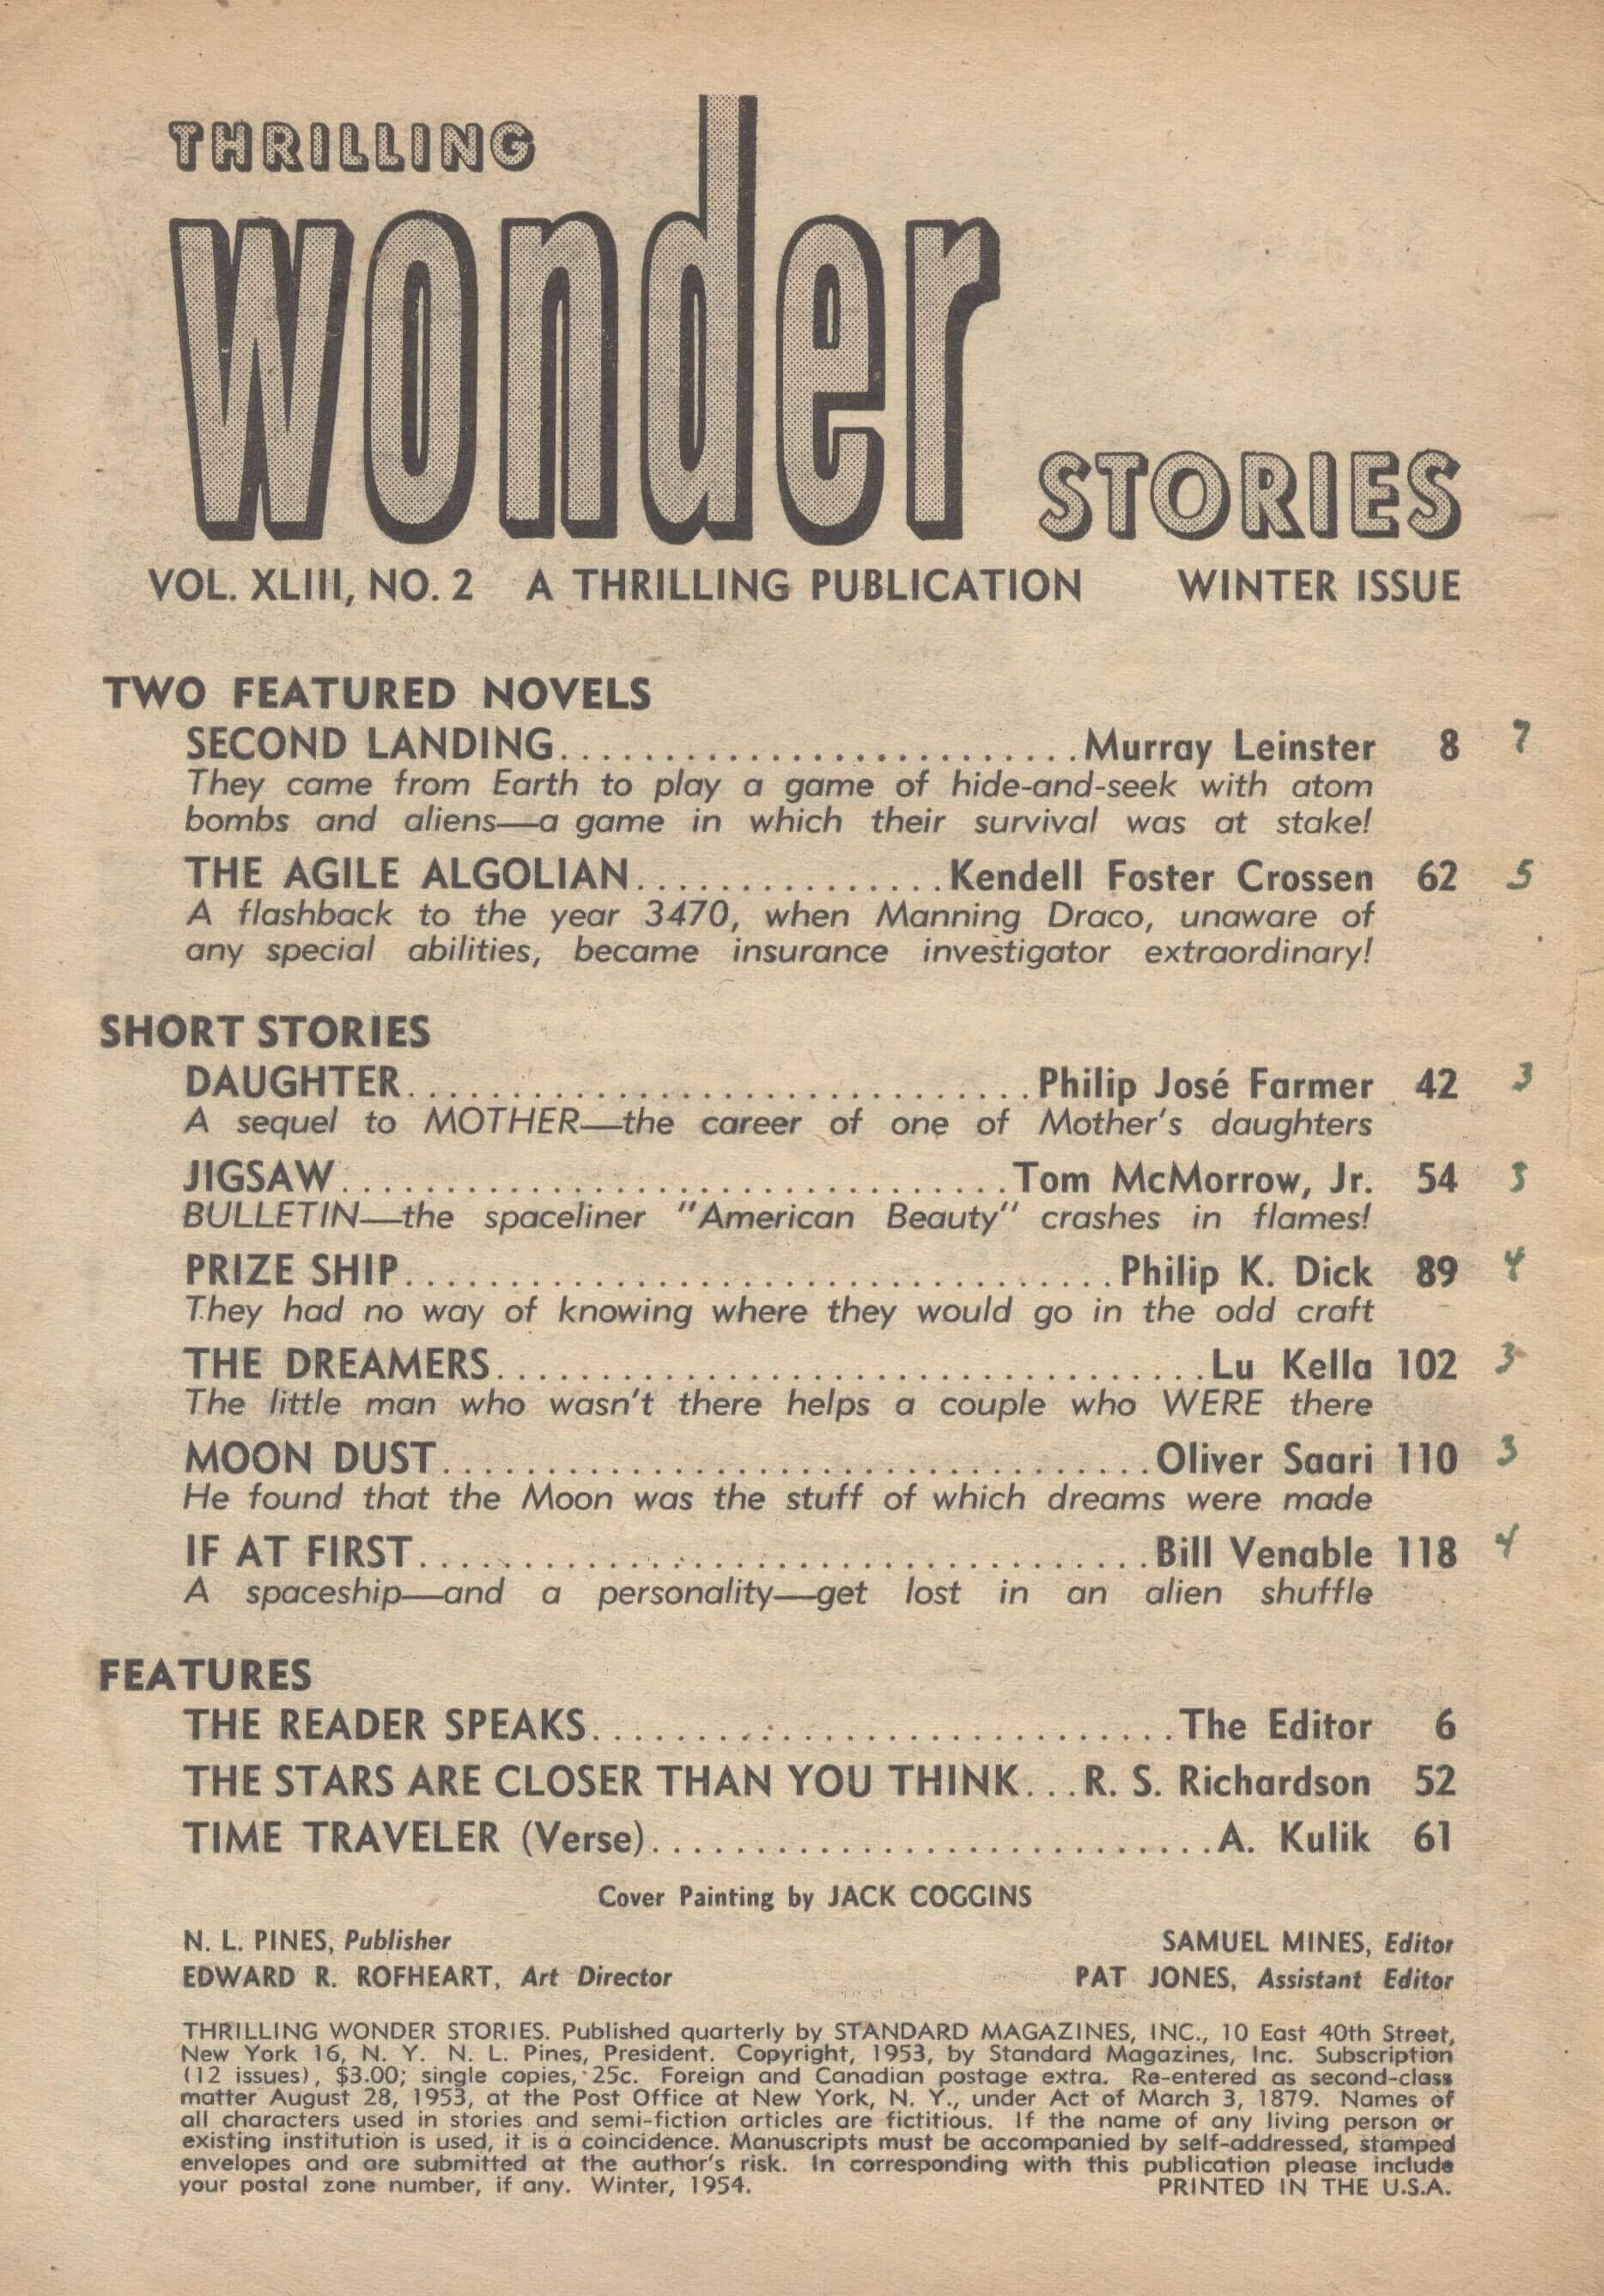 Thrilling Wonder Stories, Winter 1954 - Table of Contents